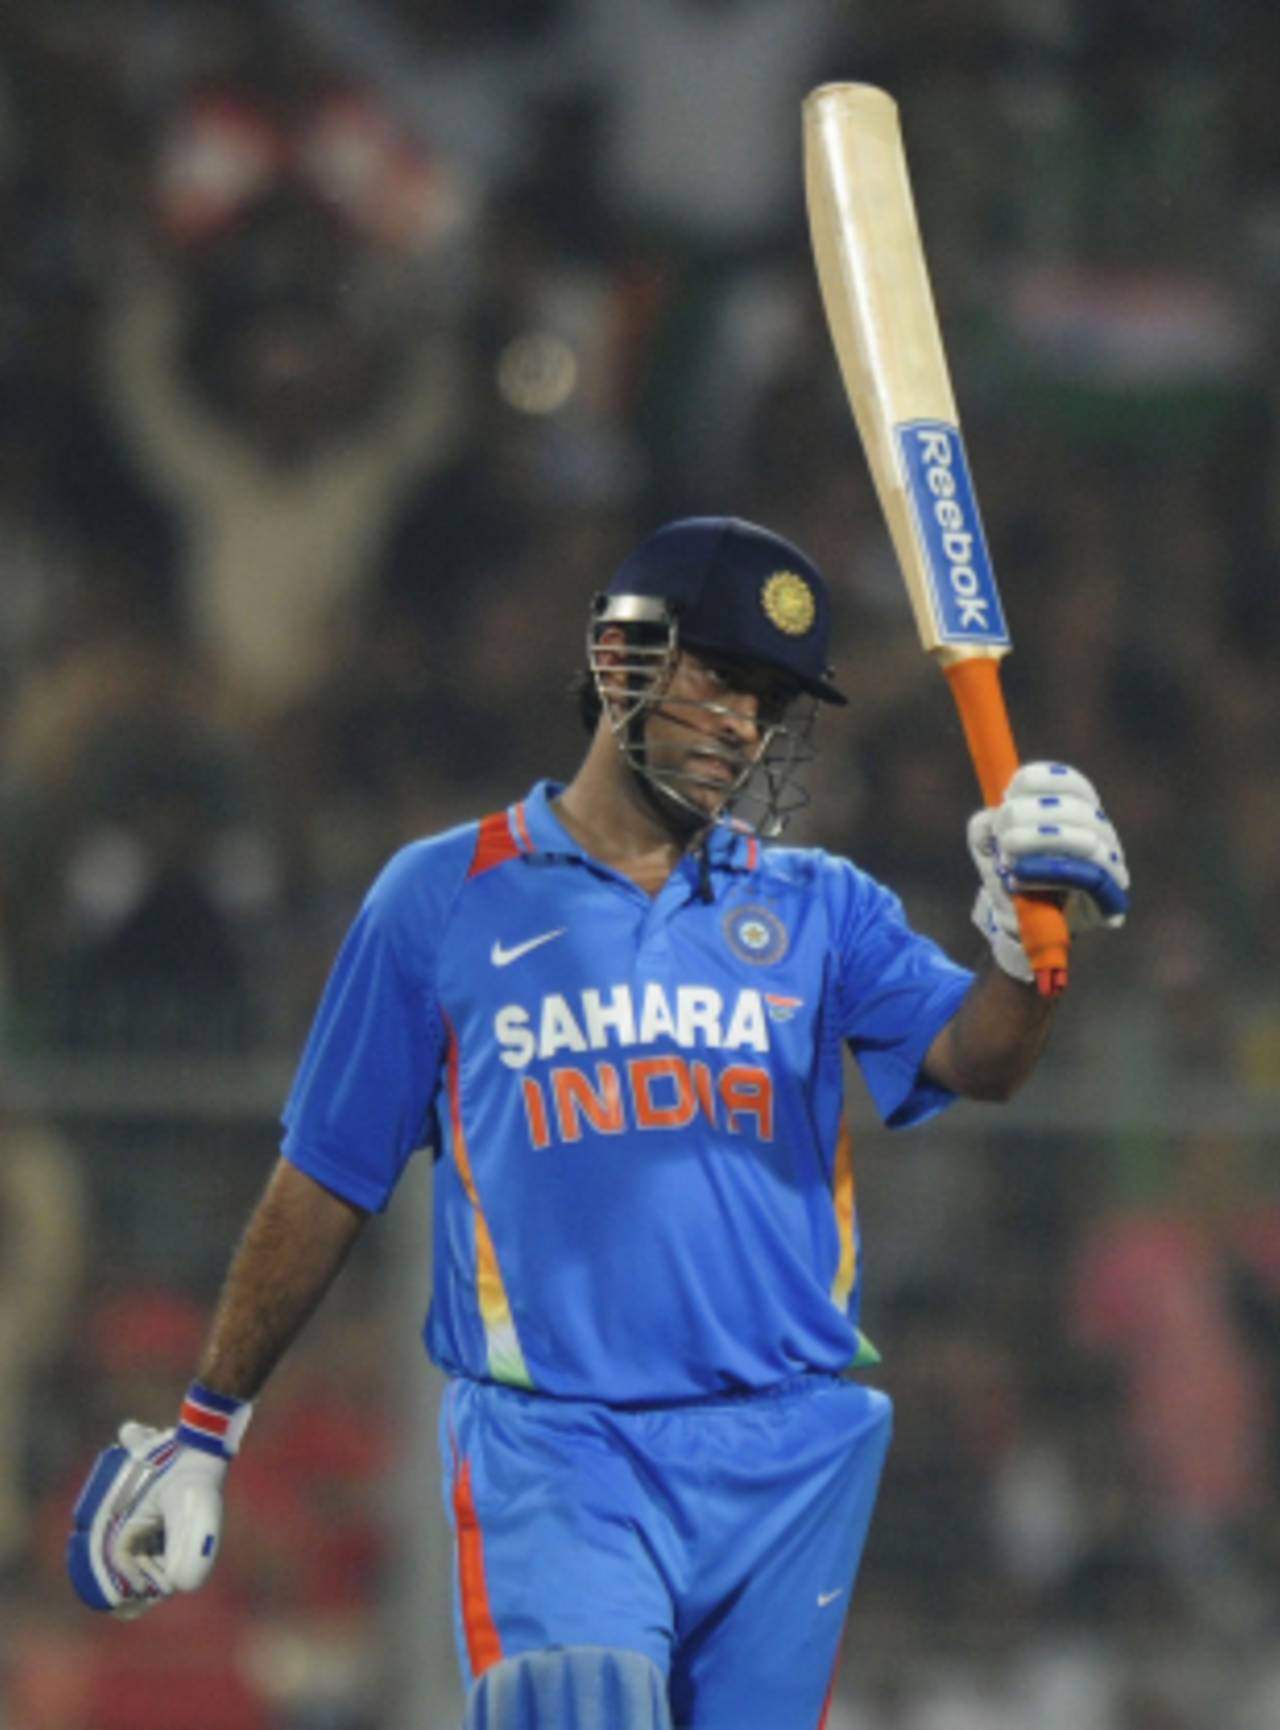 MS Dhoni raises his bat after reaching fifty, India v England, 5th ODI, Eden Gardens, October 25 2011